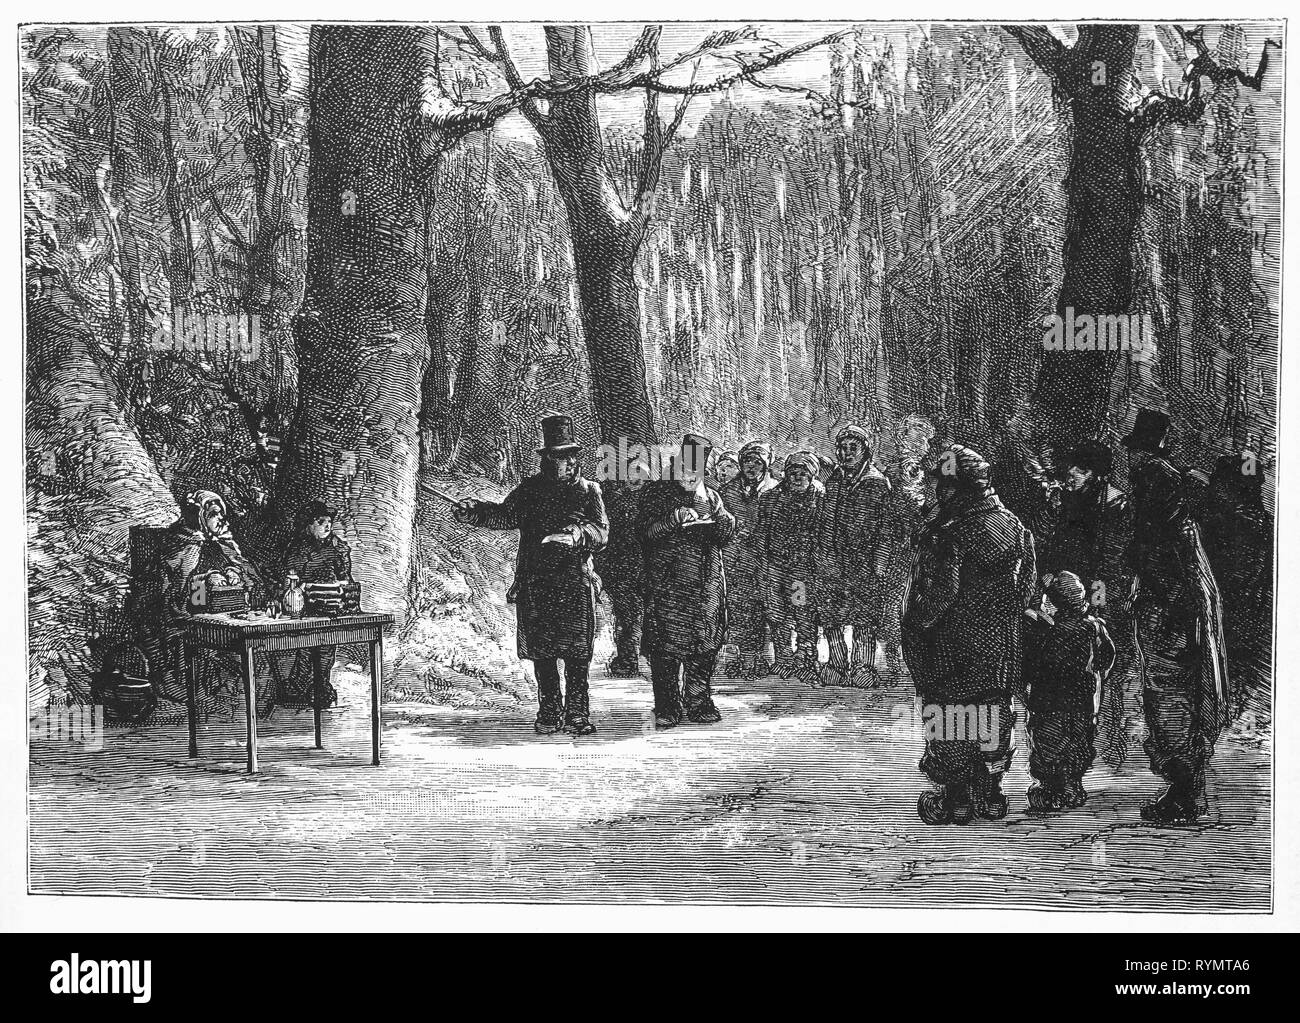 A woodland auction attended by the land-owner in which local farmers buy individual trees. From the Camera Obscura, a 19th Century collection of Dutch humorous-realistic essays, stories and sketches in which Hildebrand, the author, takes an ironic look at the behavior of the 'well-to-do', finding  them bourgeois and without a good word for them. Stock Photo